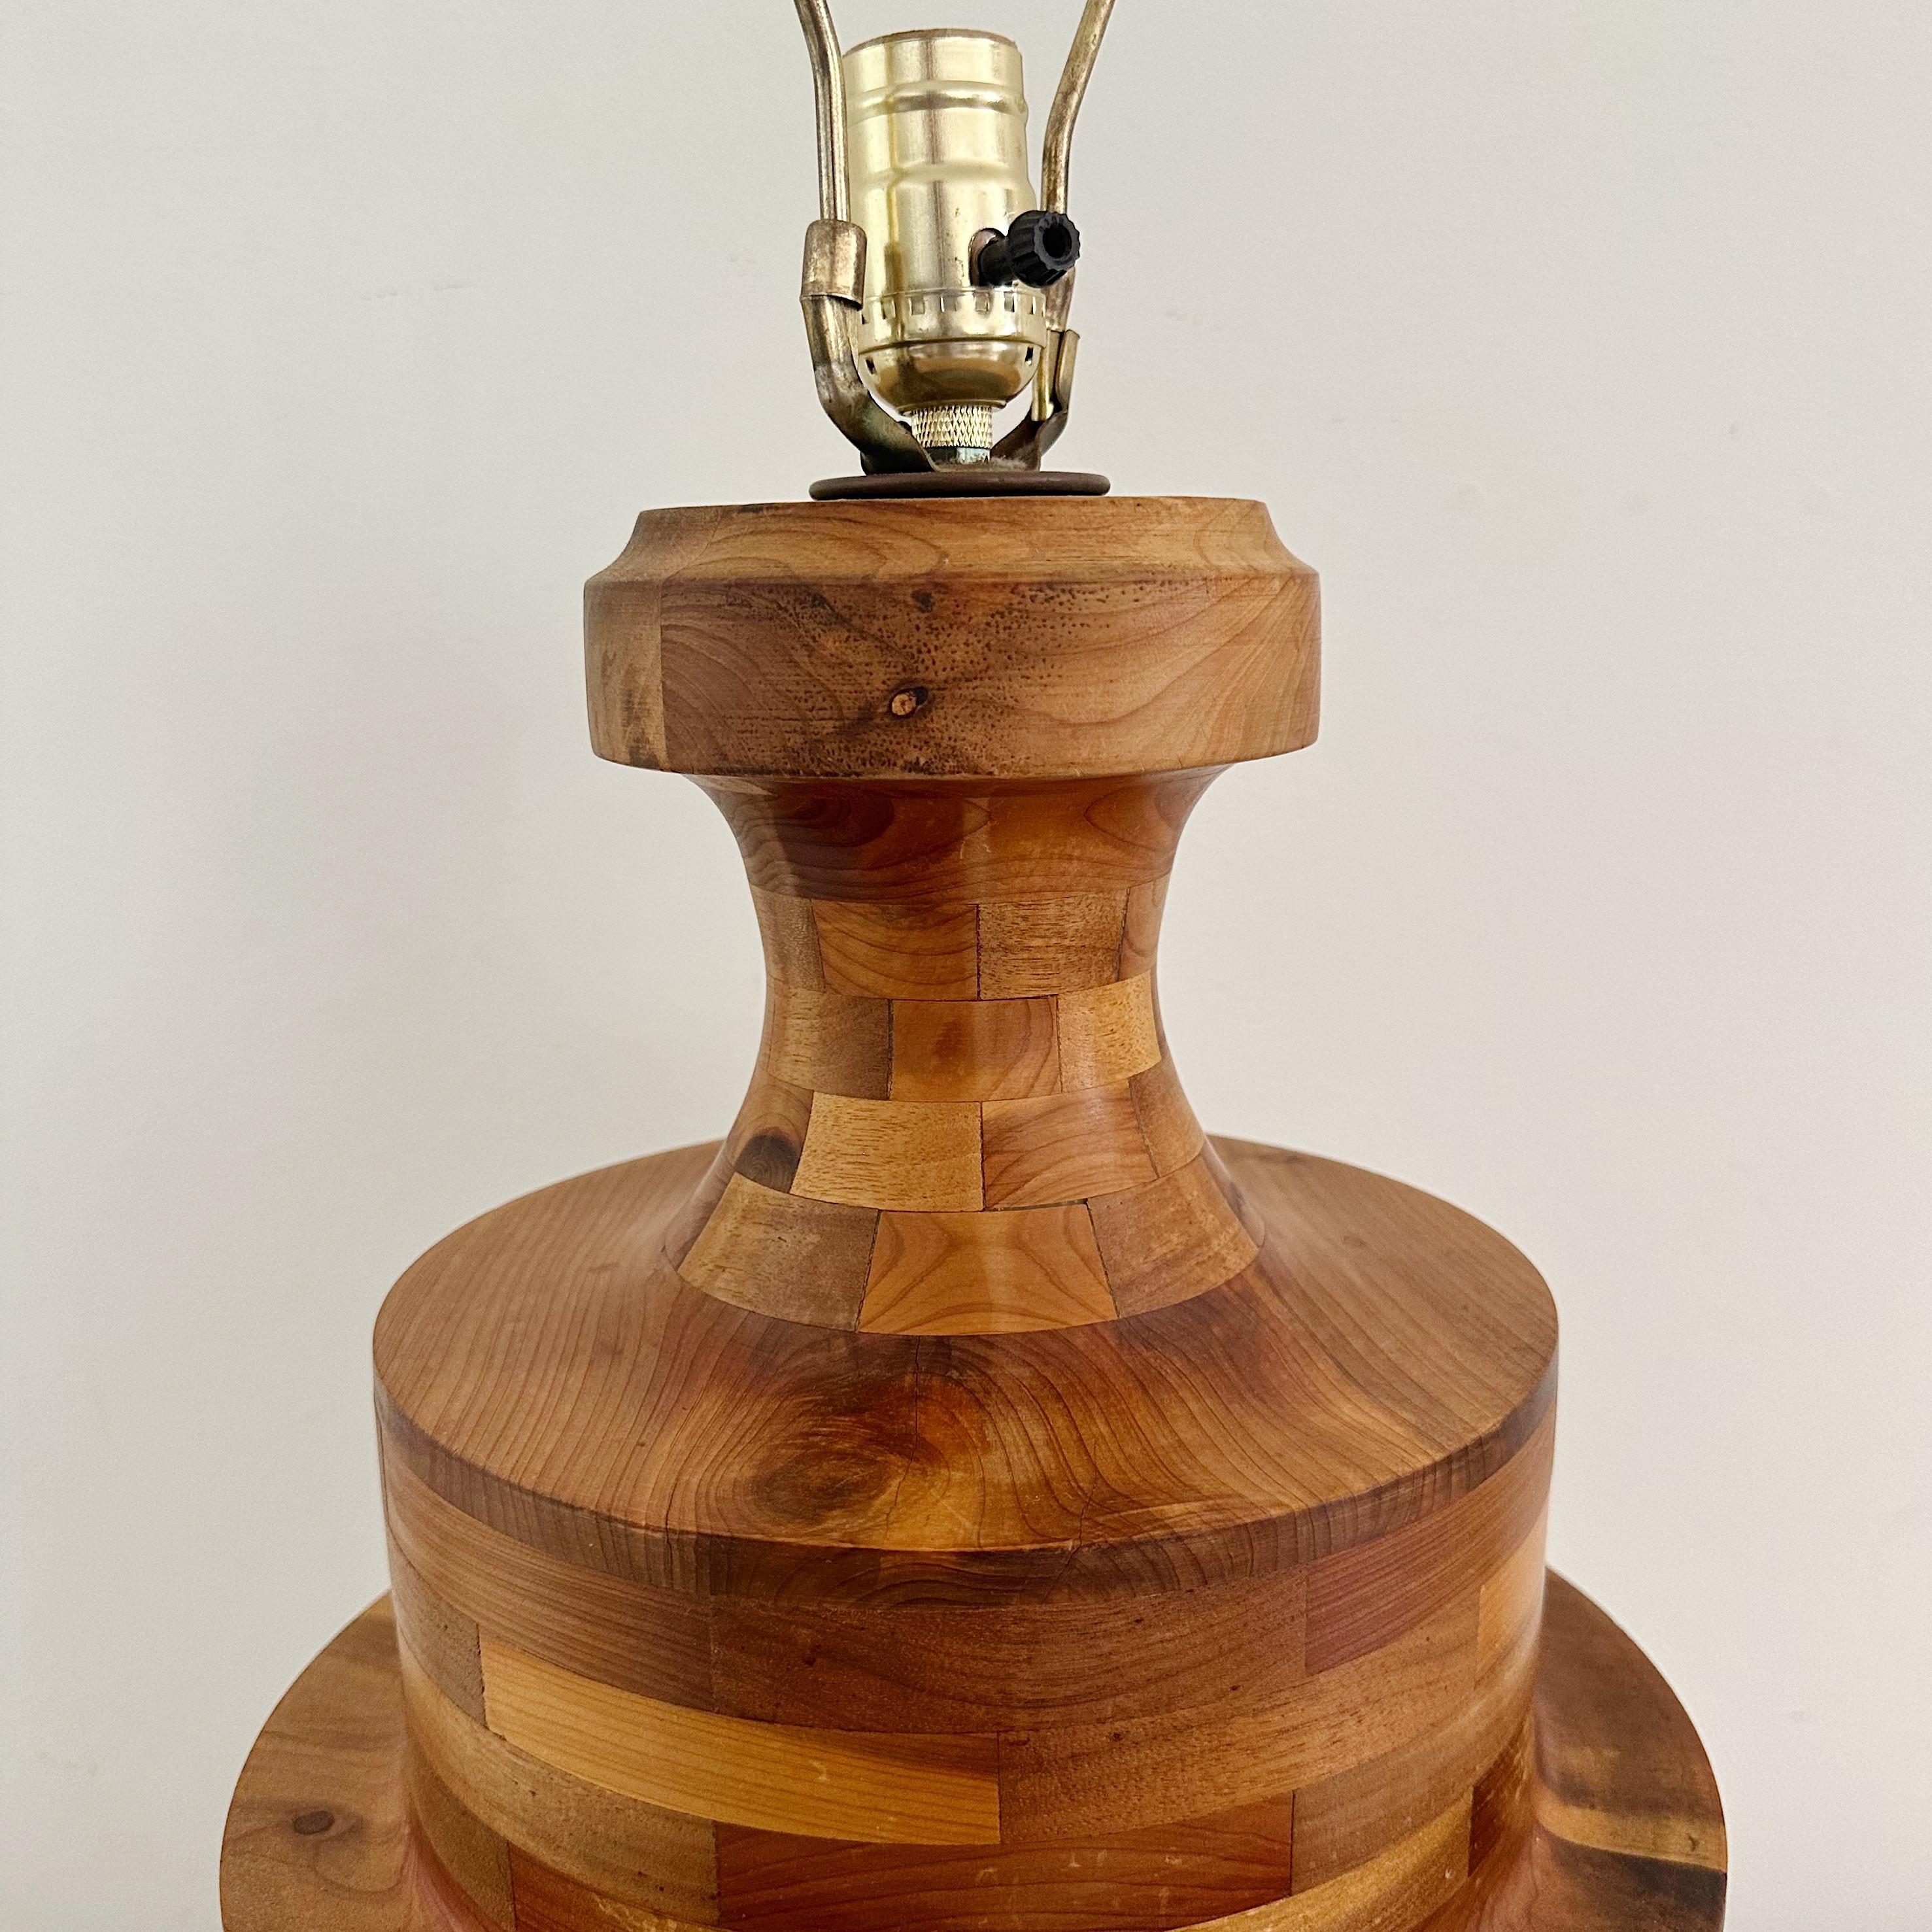 American Vintage Marquetry Hand-Turned Lathe Block Lamp, Crafted from Various Woods from For Sale